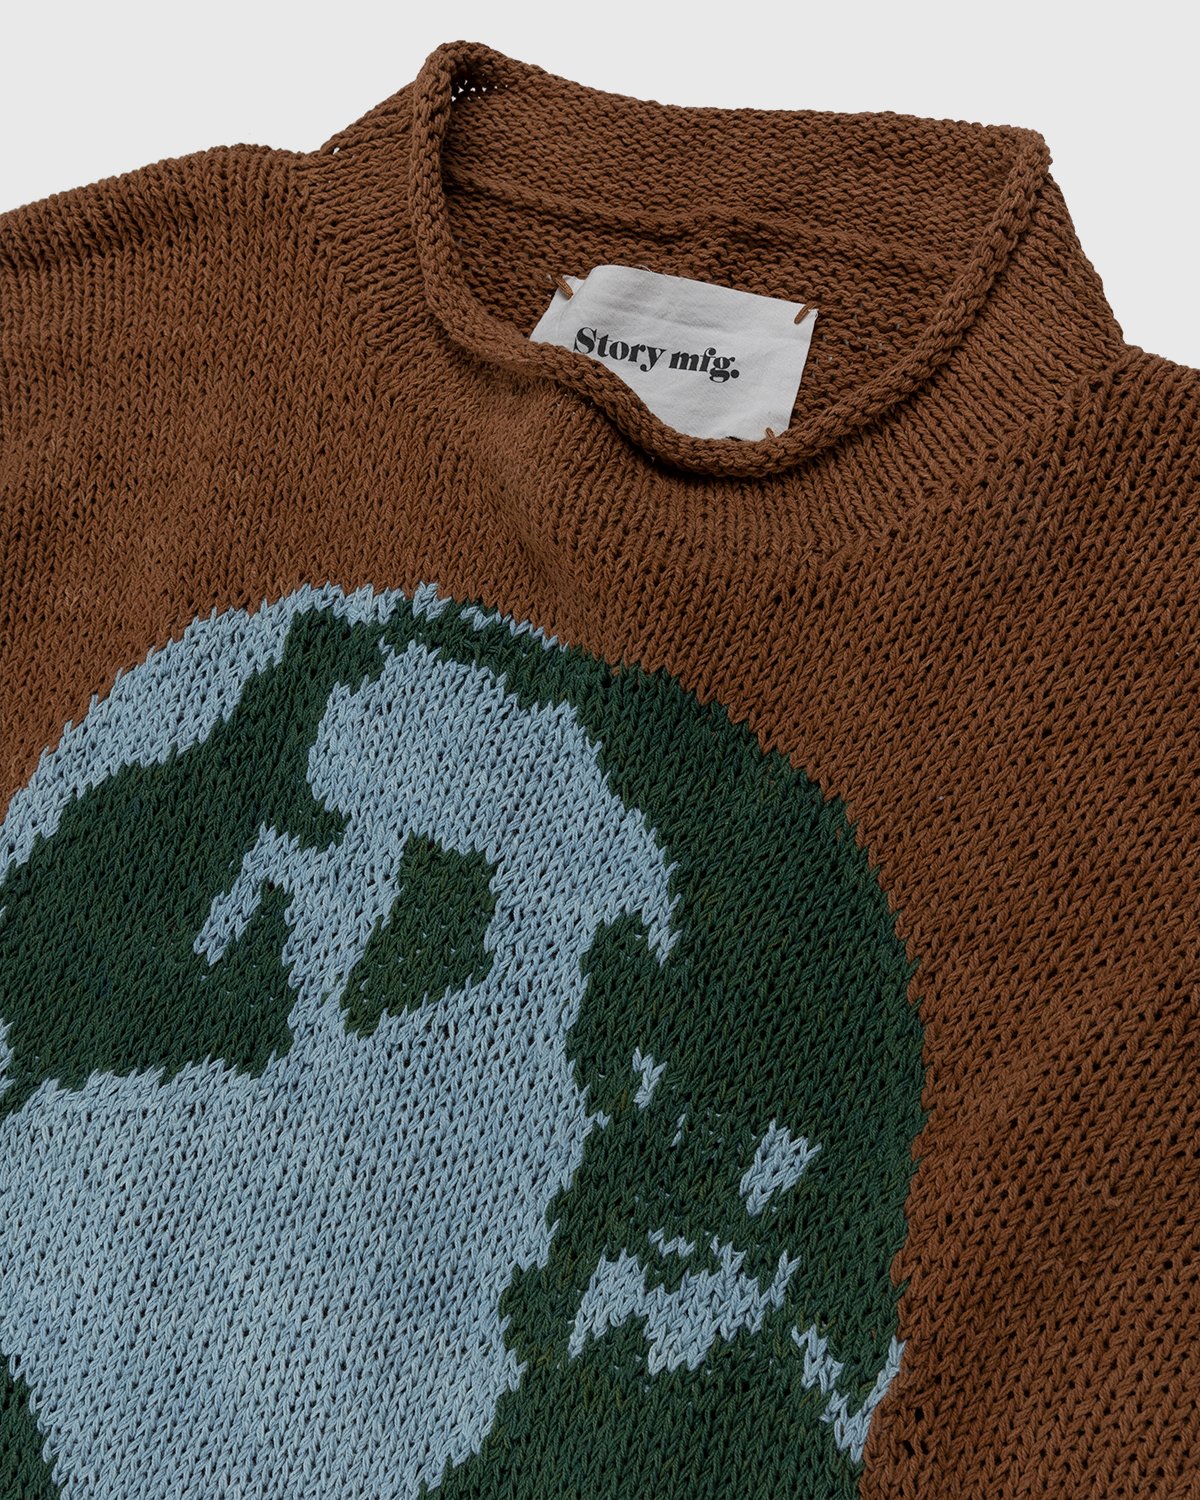 Story mfg. - Twinsun Rollneck Sweater Mother Earth Brown - Clothing - Brown - Image 4